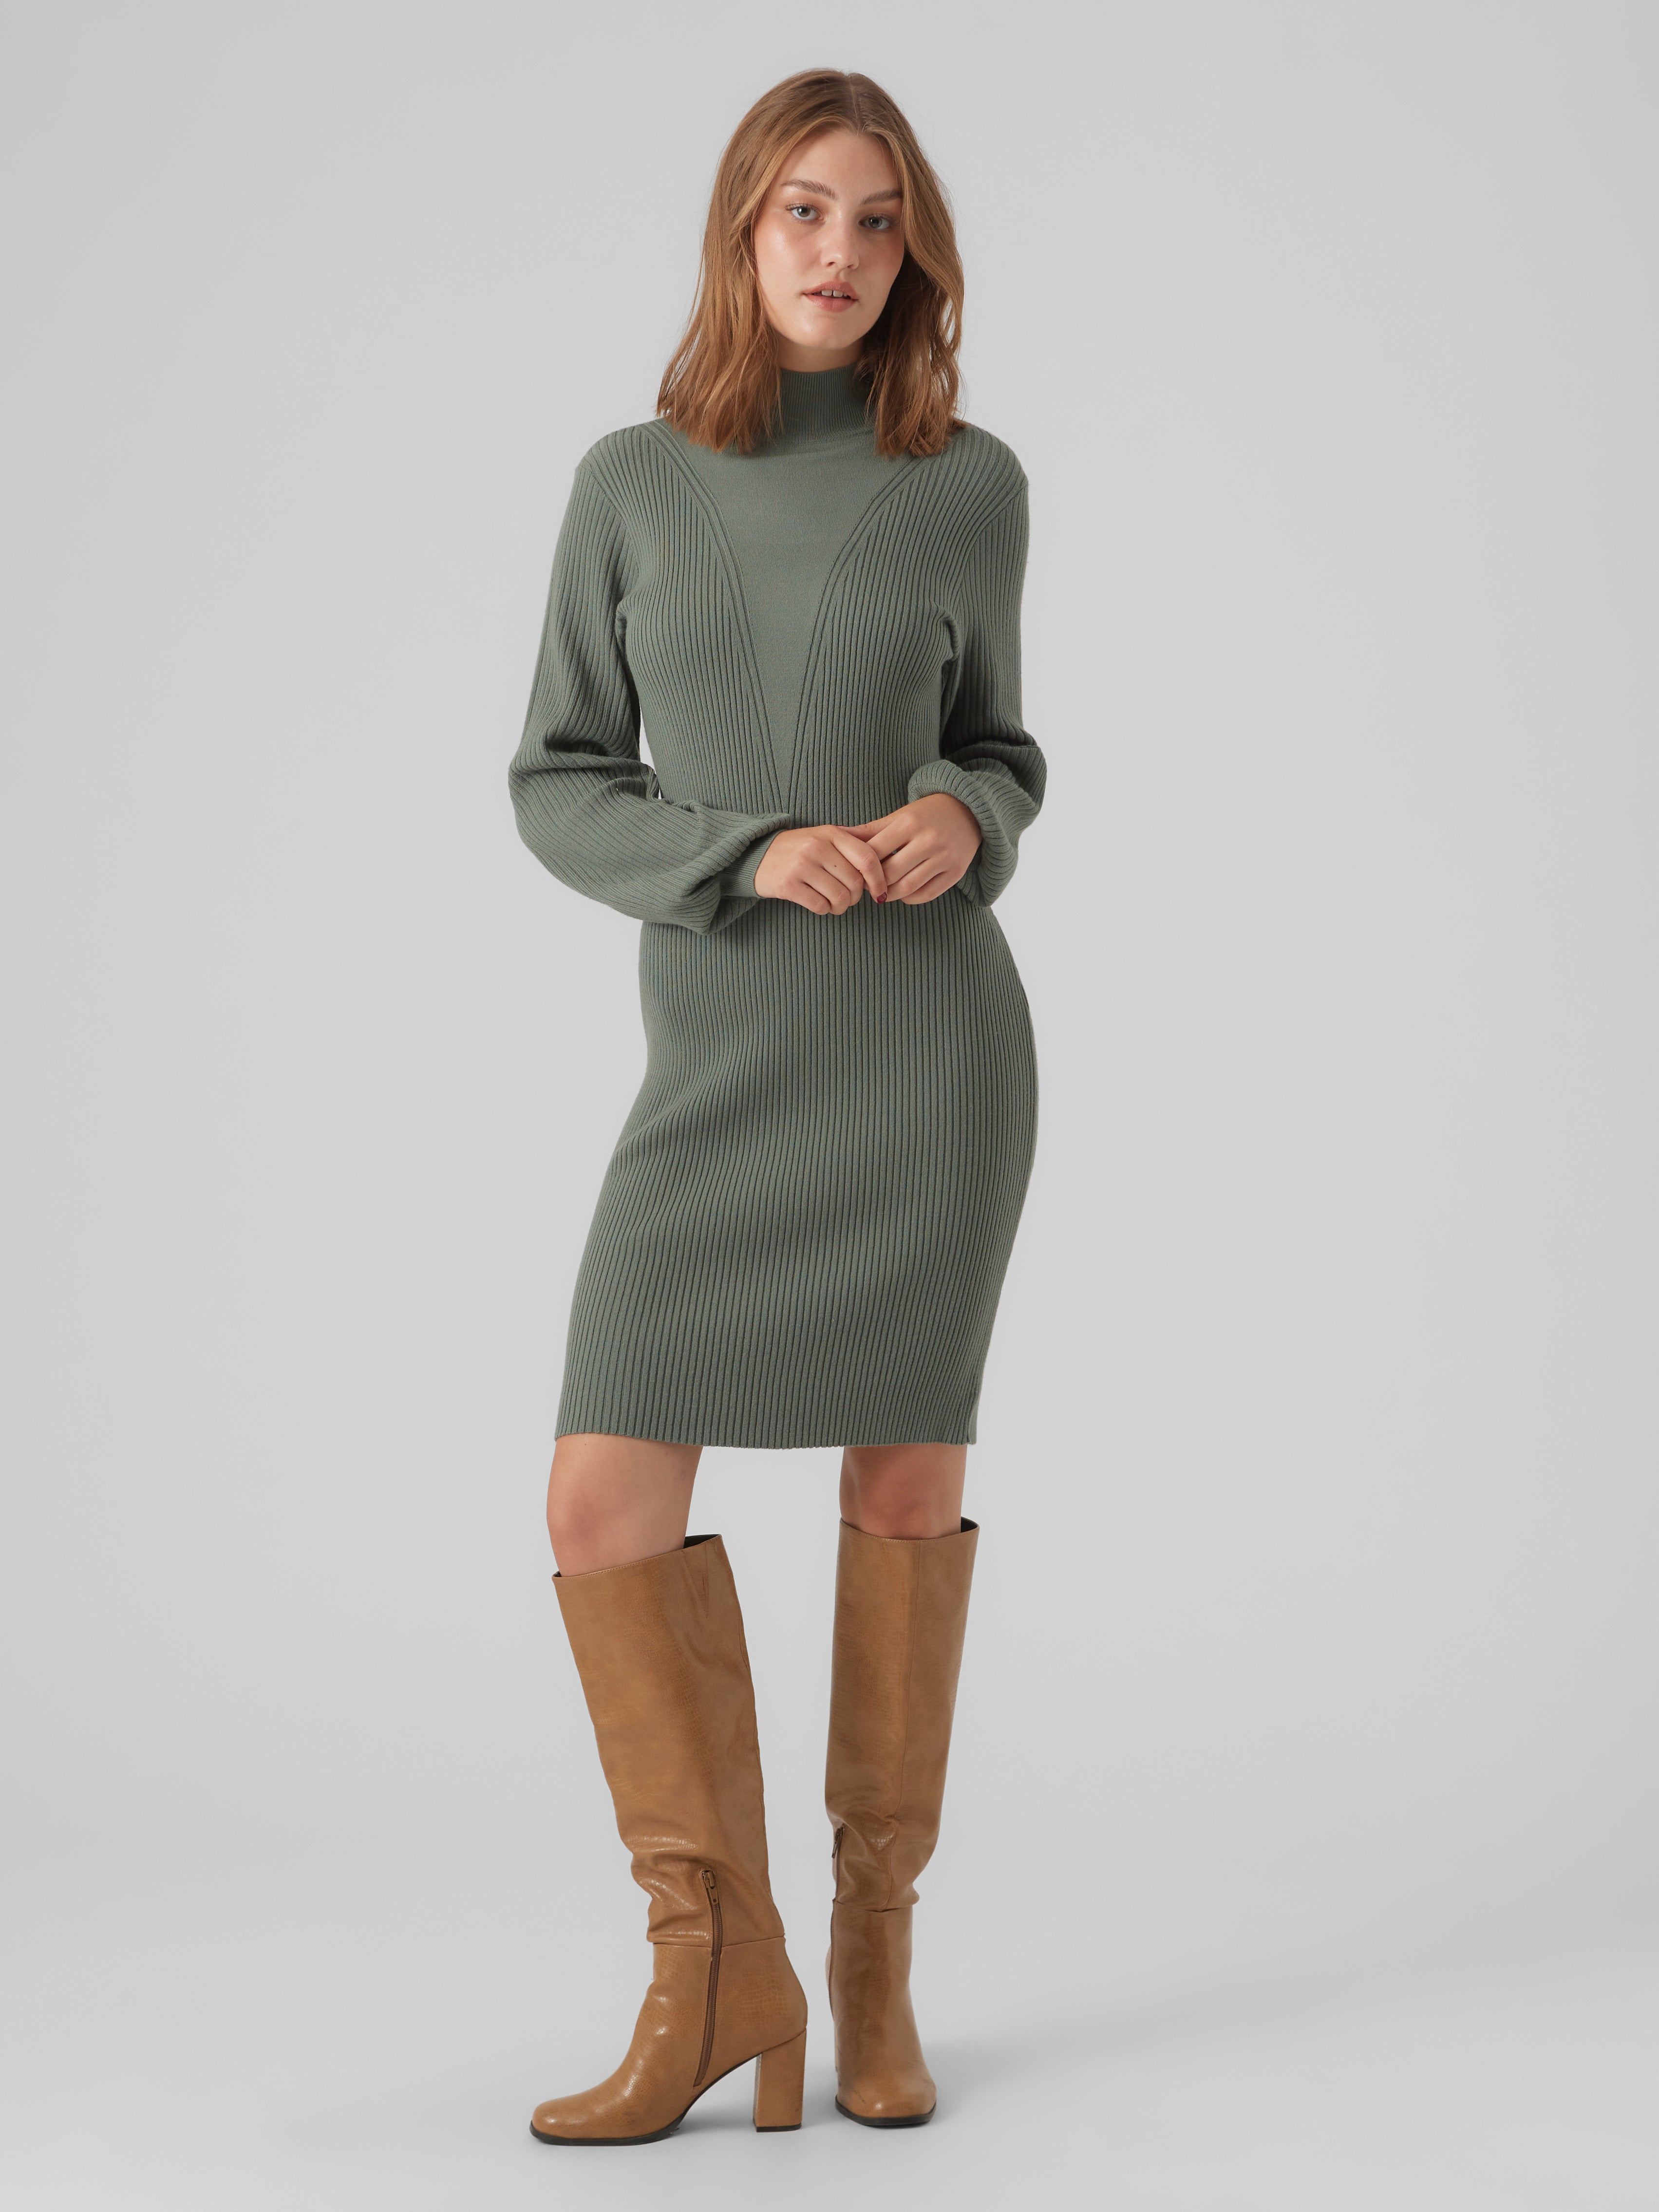 Knitted dress with 25% discount! | Vero Moda®